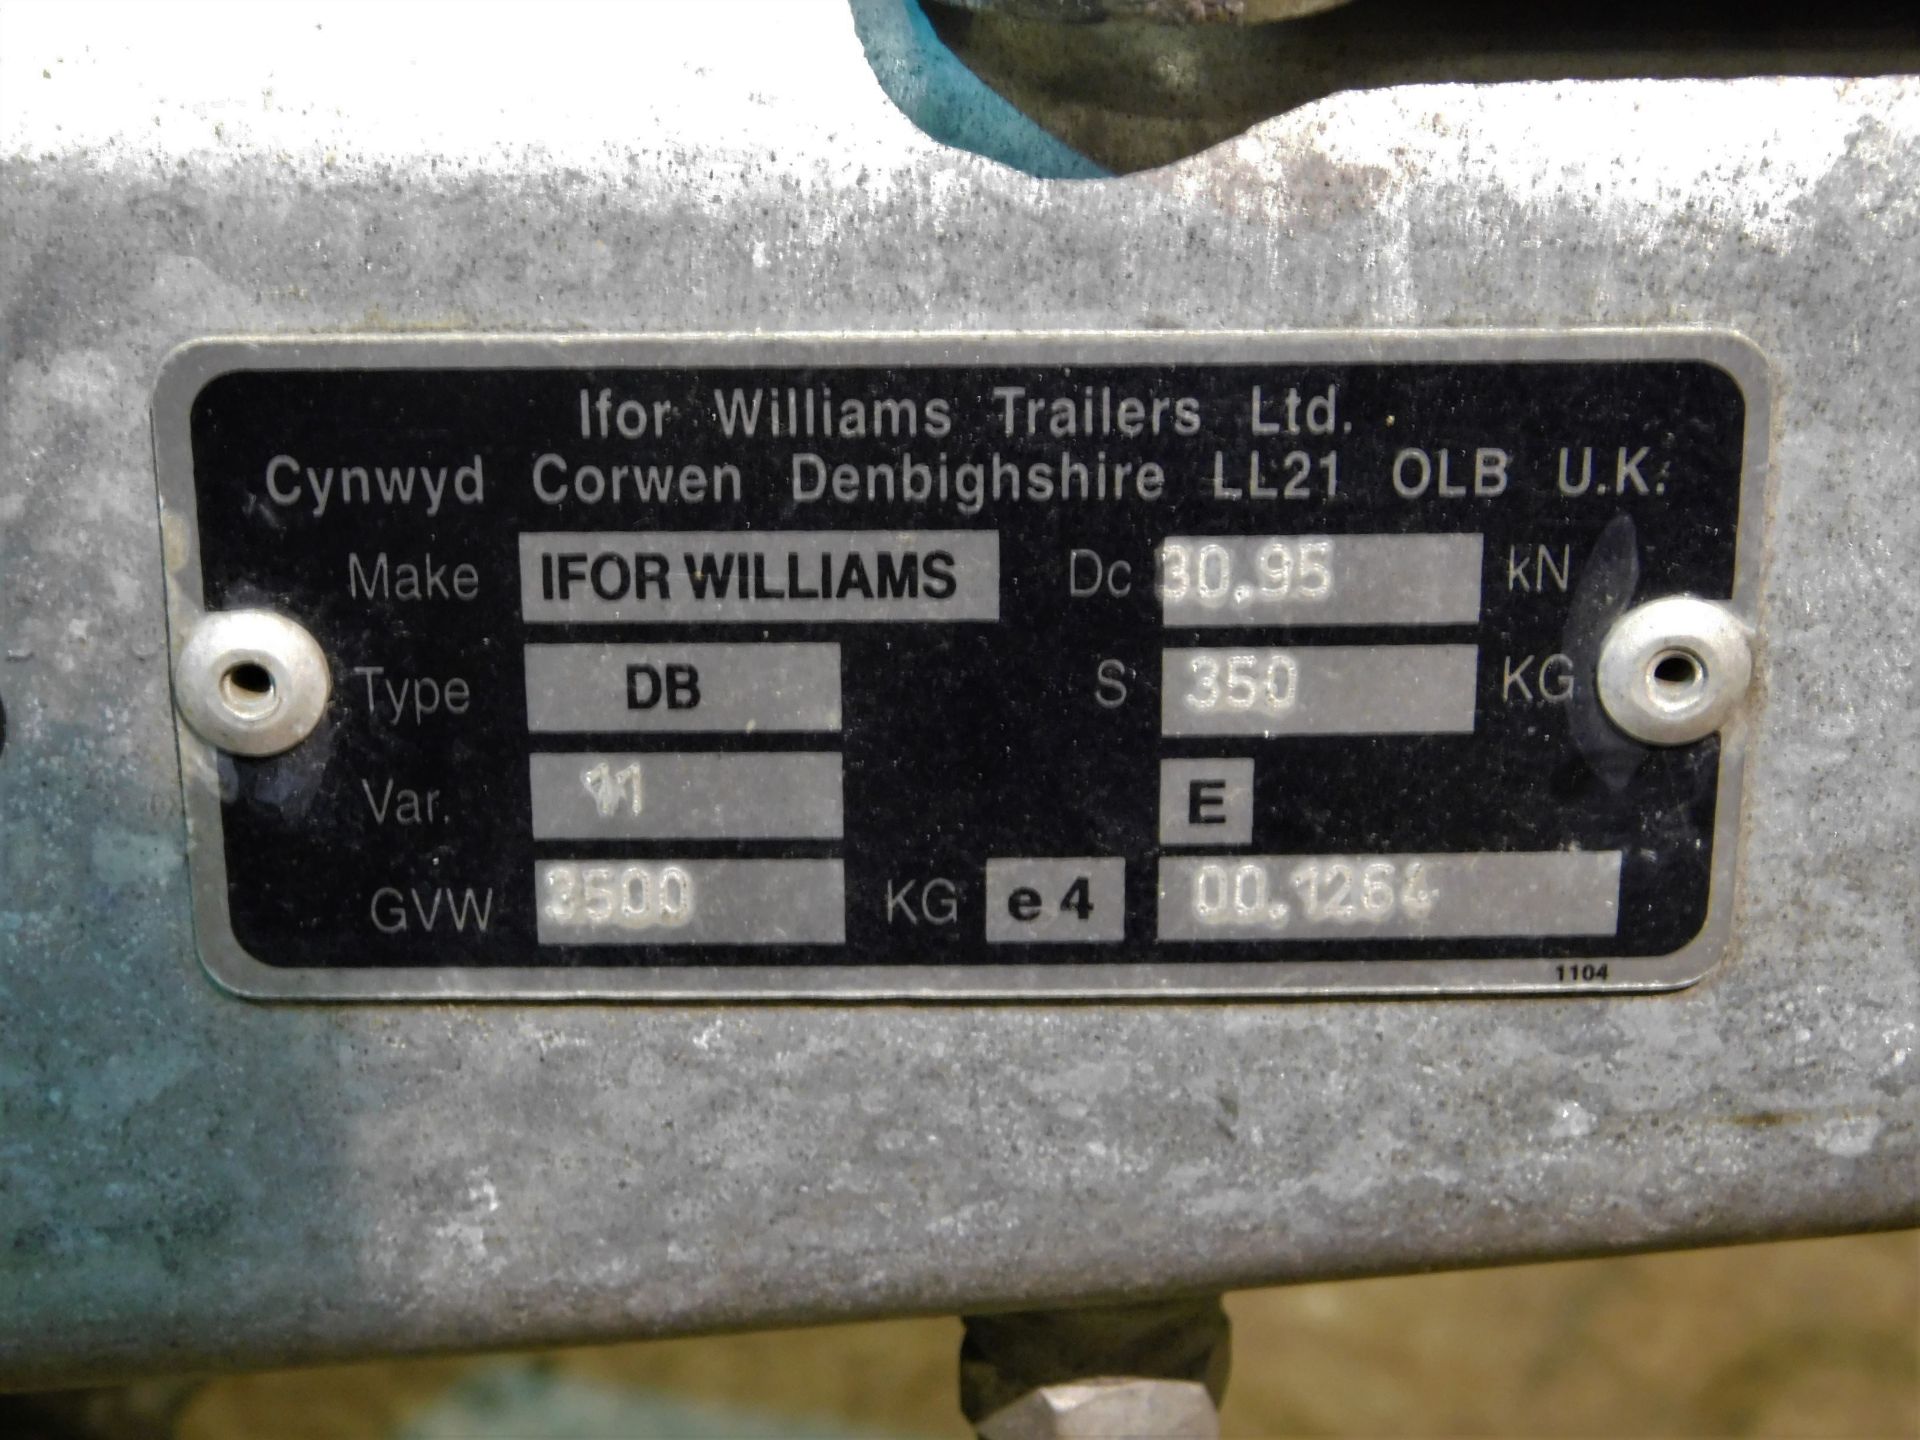 Ifor Williams Type 2Cb LT105G Twin Axle Trailer, Serial Number; 5159713, Manufactured Nov 2018, - Image 7 of 10